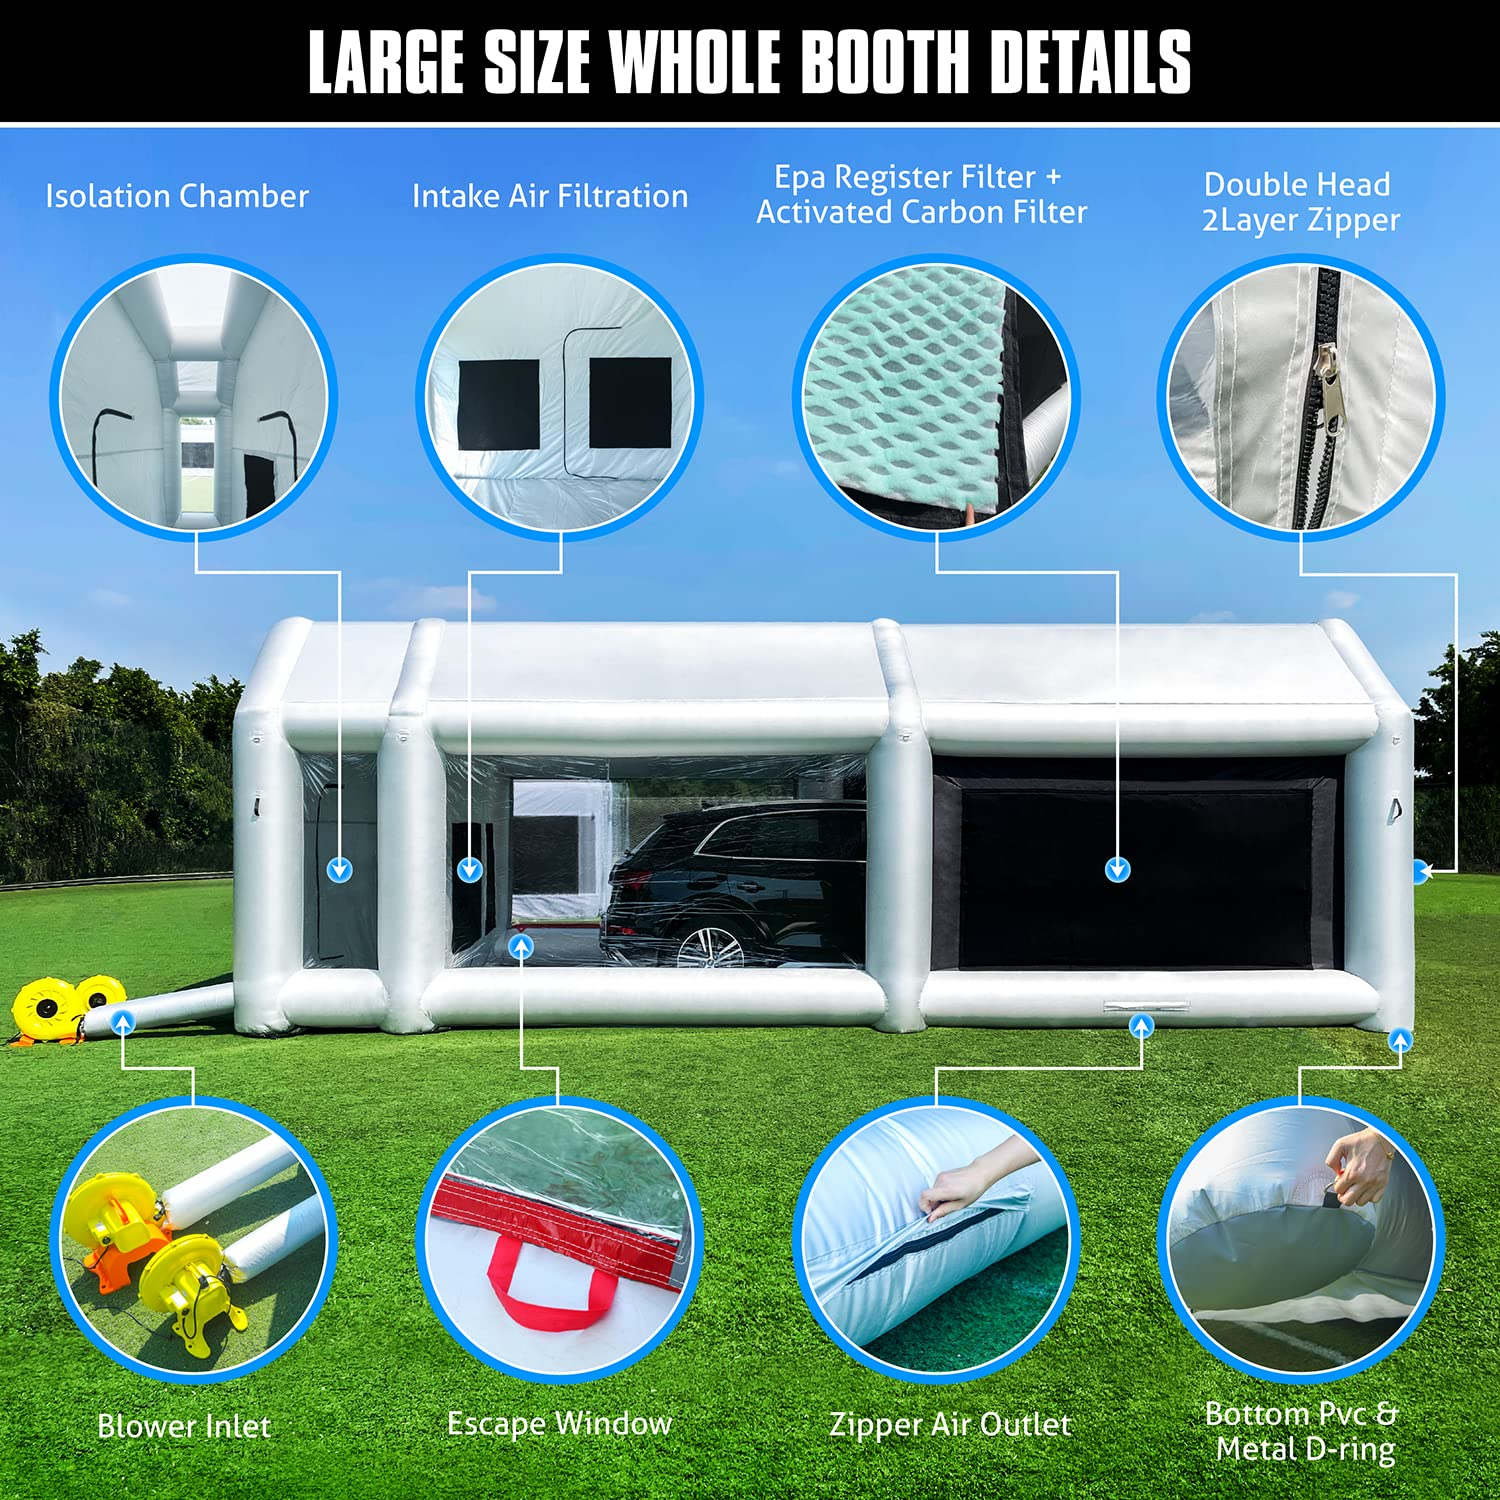 WARSUN Inflatable Paint Booth 28x15x10Ft with Dual-Layer & Oversized Air Filters Portable Paint Booth with 950W+750W Blowers Inflatable Spray Booth Painting for Car